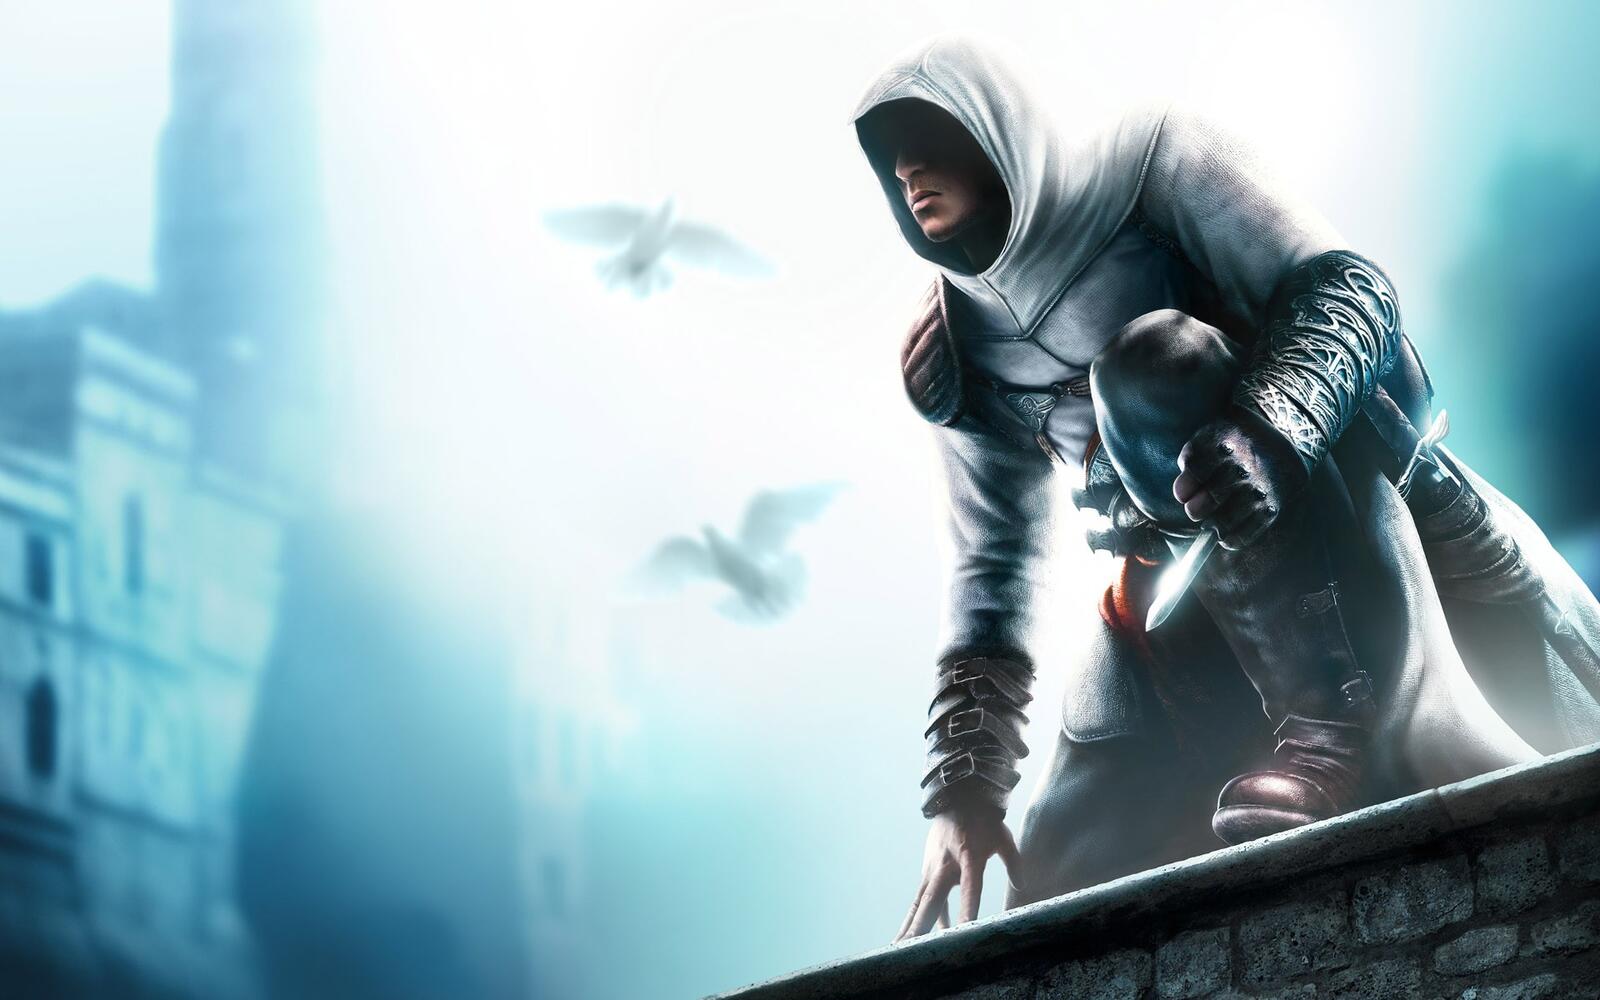 Wallpapers video games an anime assassins creed on the desktop